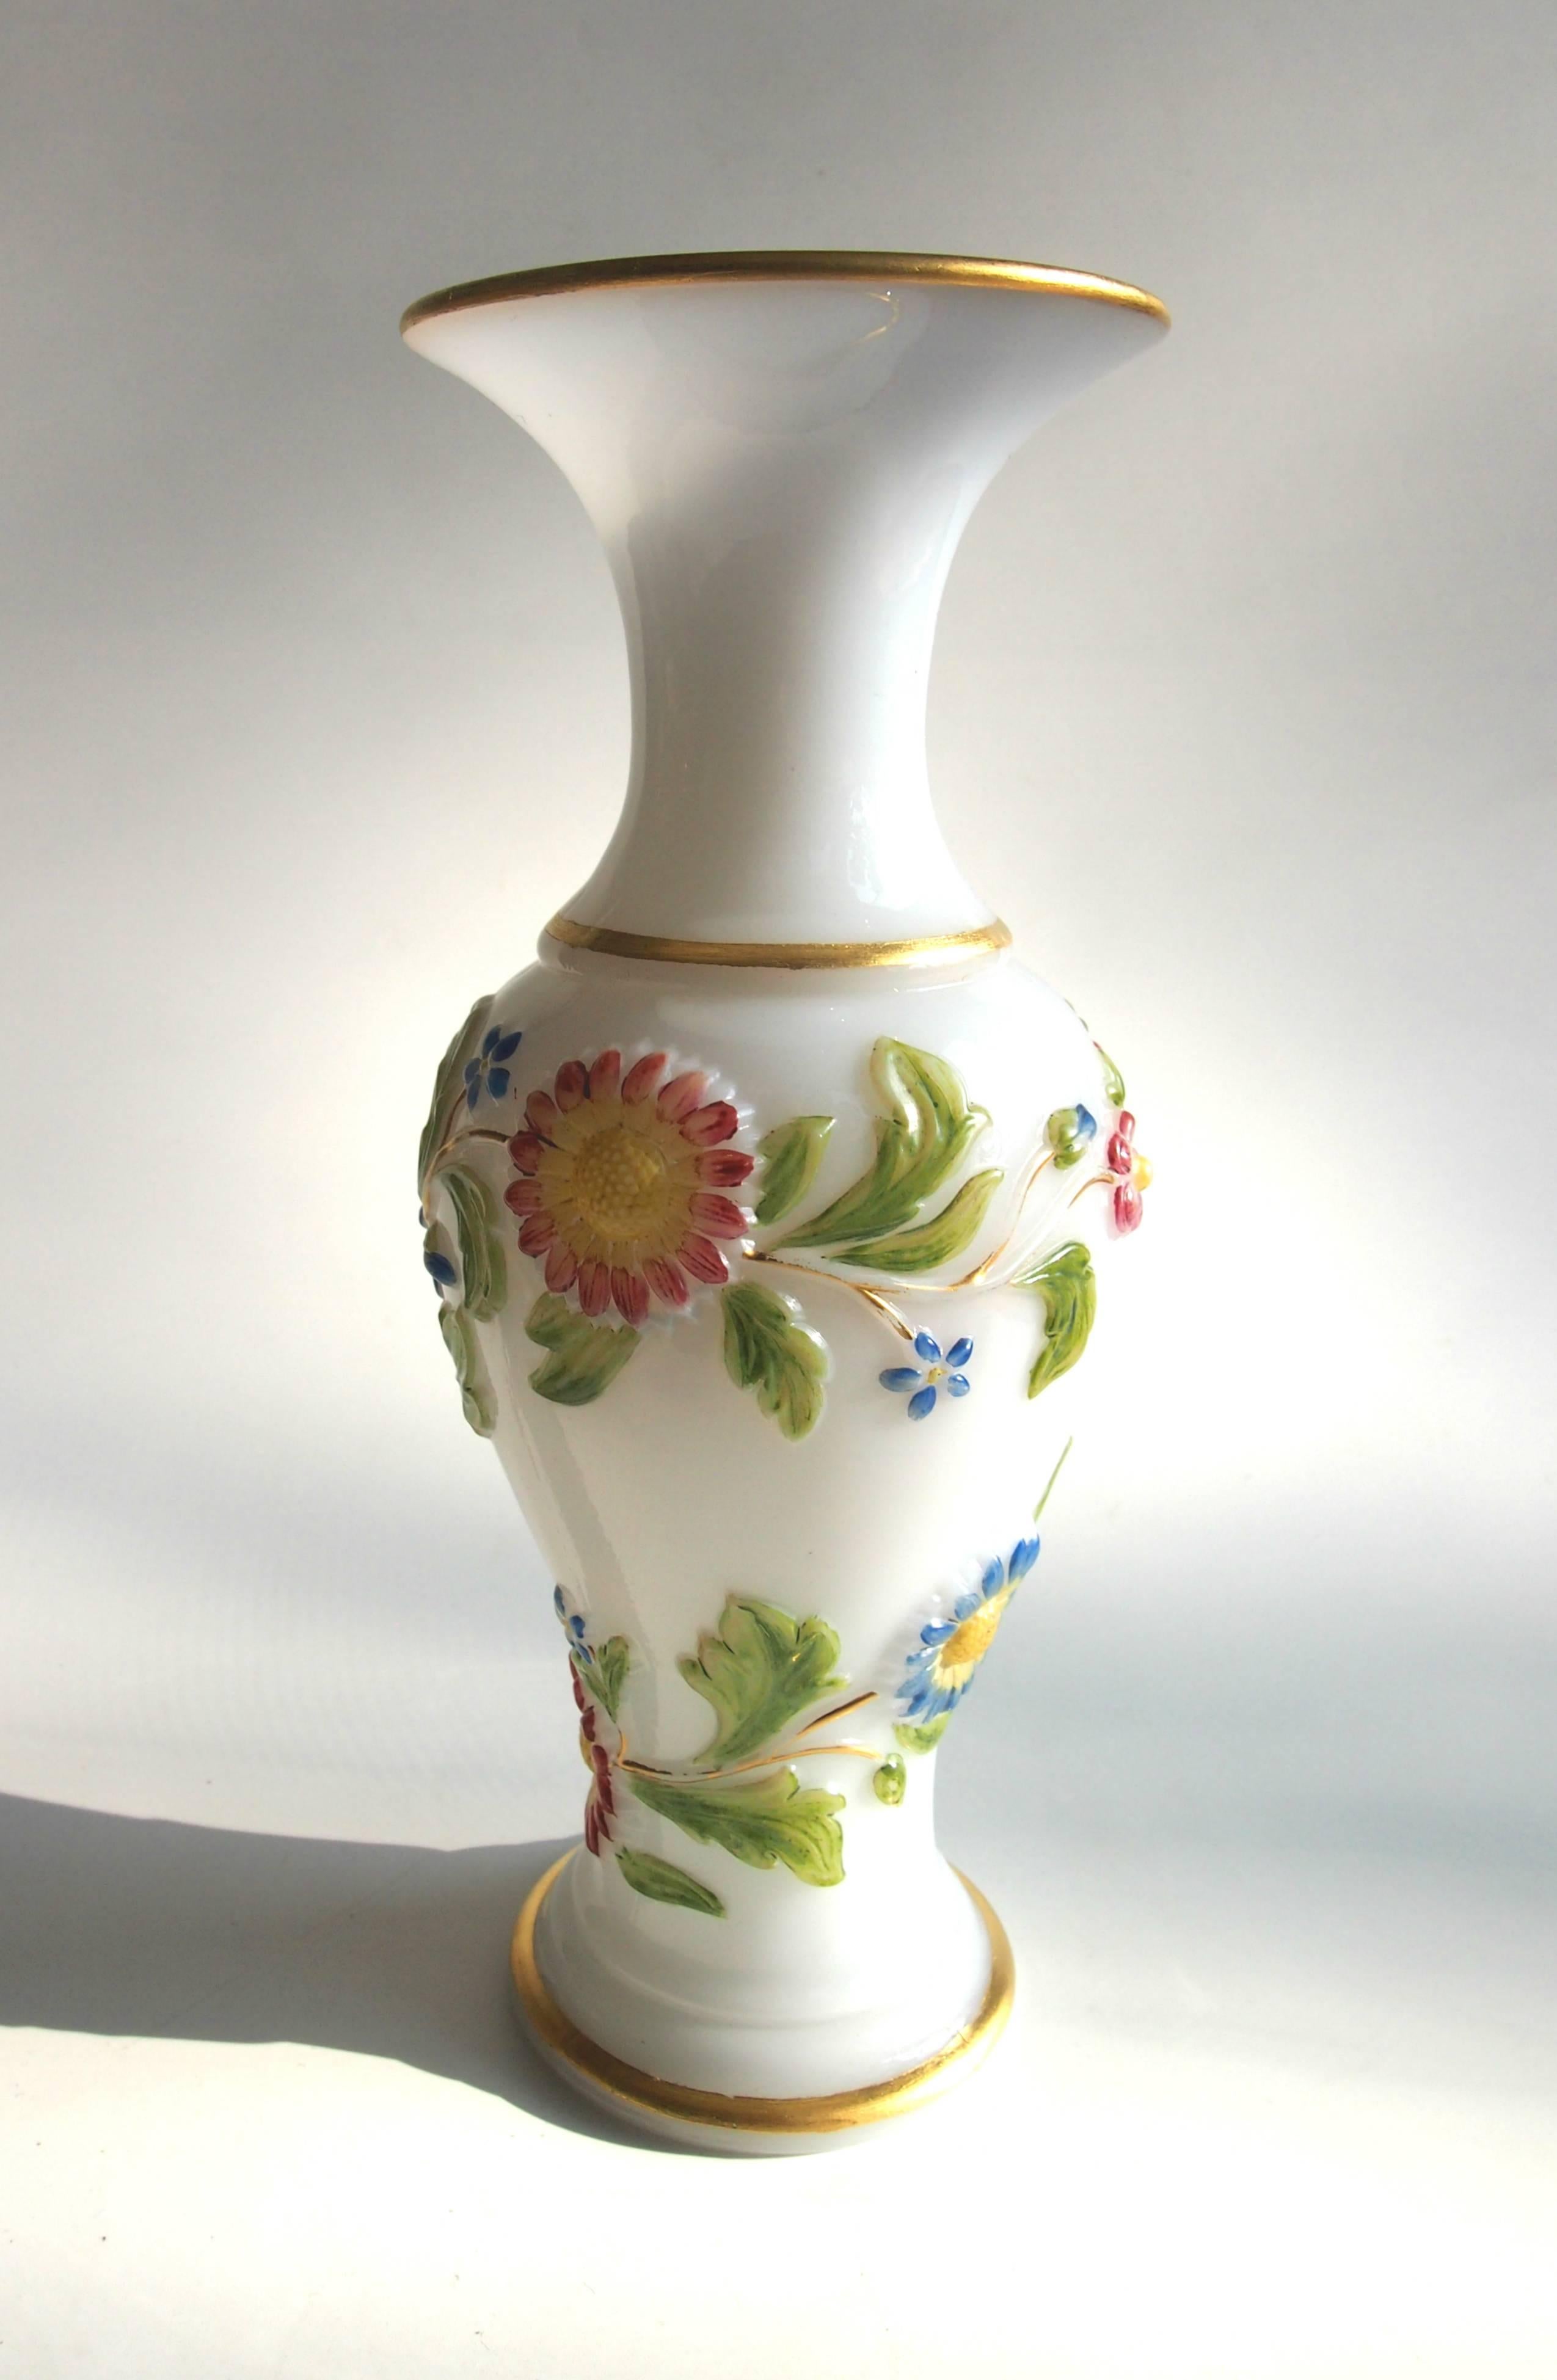 Amazing mid-19th century opaline enamelled and gilded Baccarat vase polychrome enamelled over fine raised daisies. Vases like these were first displayed at the great Paris exhibition of 1855.


Baccarat is and has been the creator of the finest